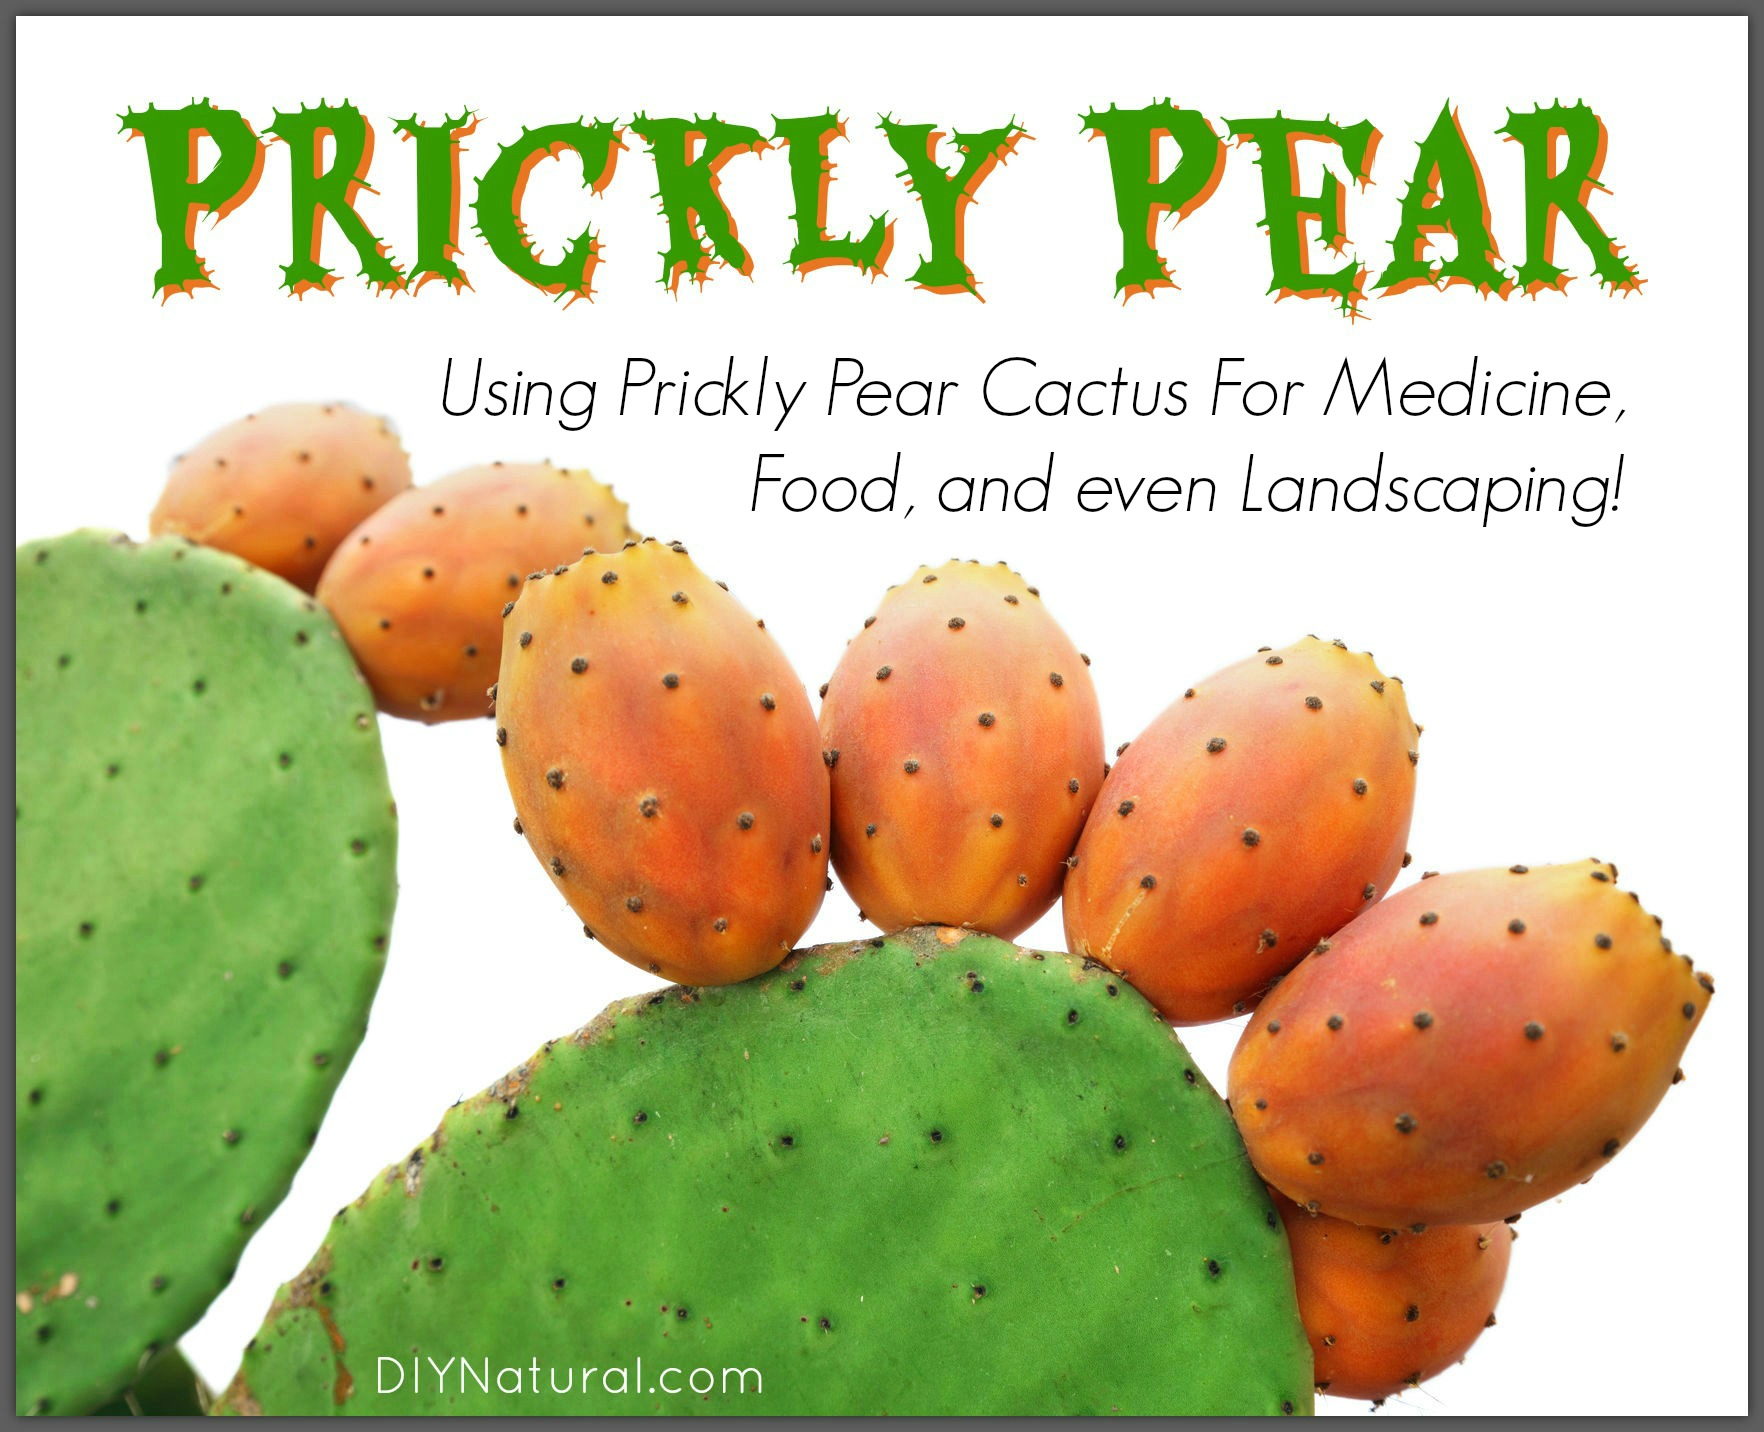 Prickly Pear How To Use This Cactus For Food And Landscaping,Layered Baked Ziti With Ricotta